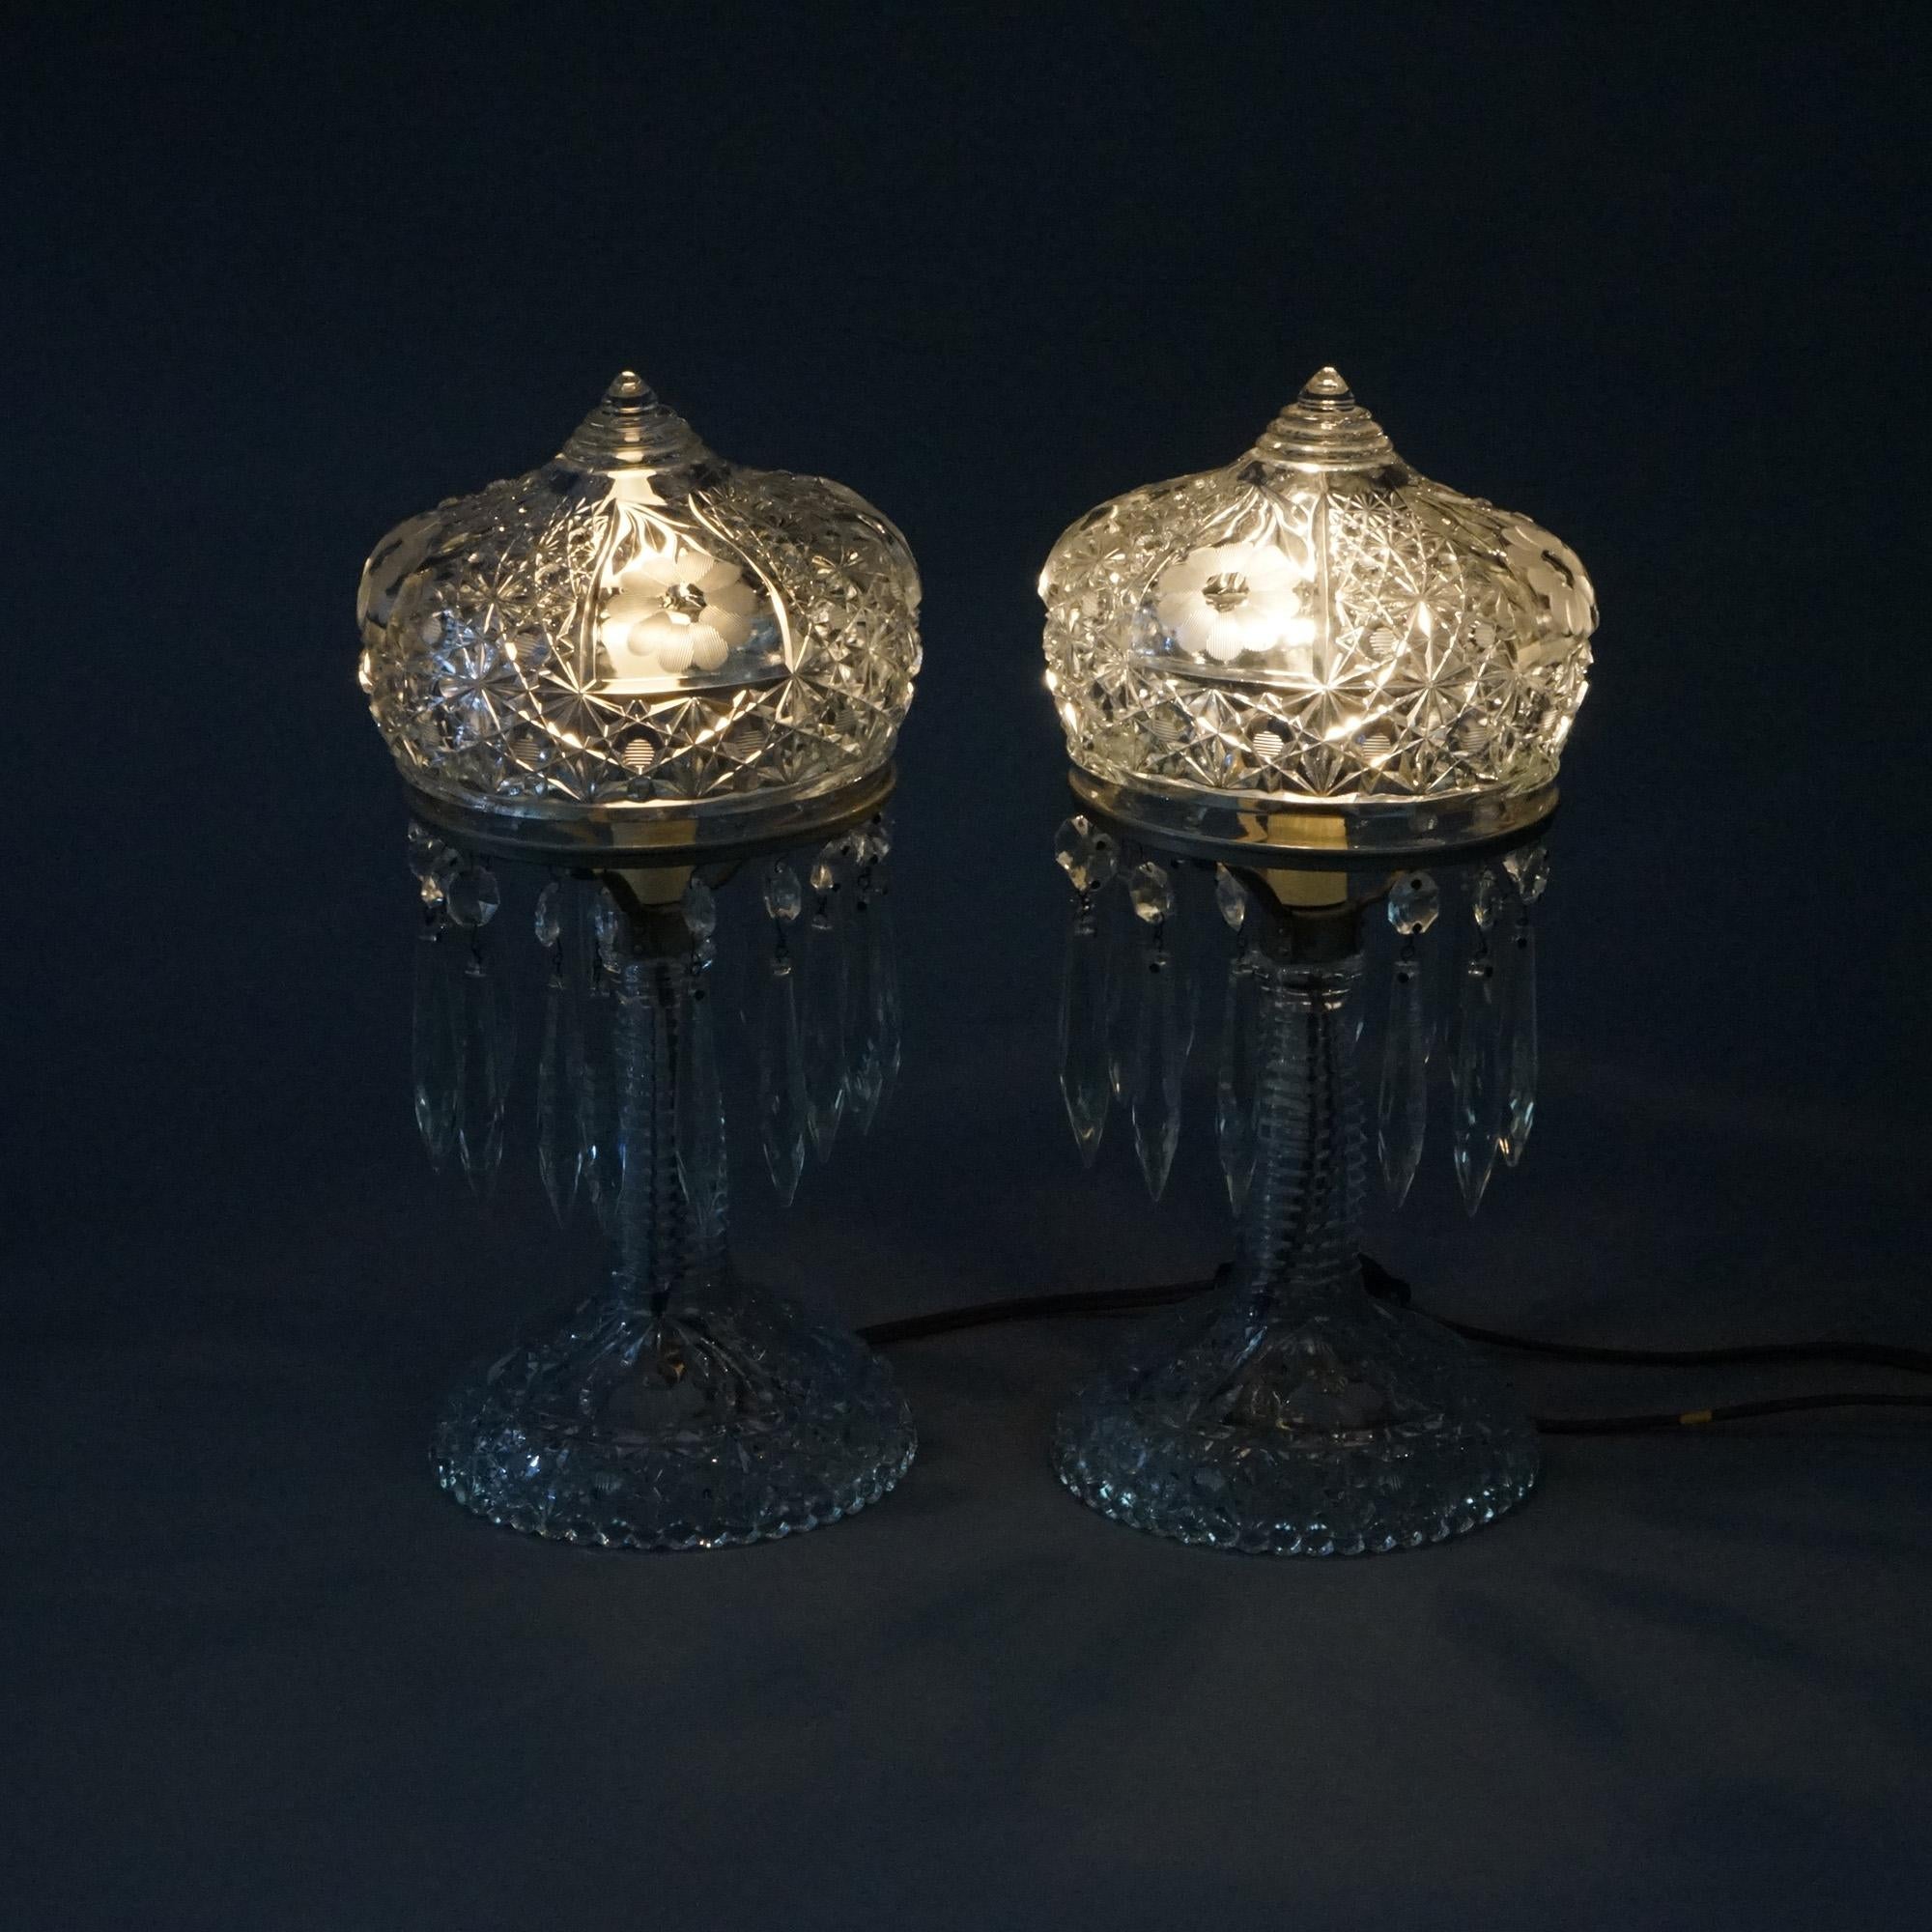 American Antique Pair of Cut Glass Table Lamps, Electrified, Circa 1930